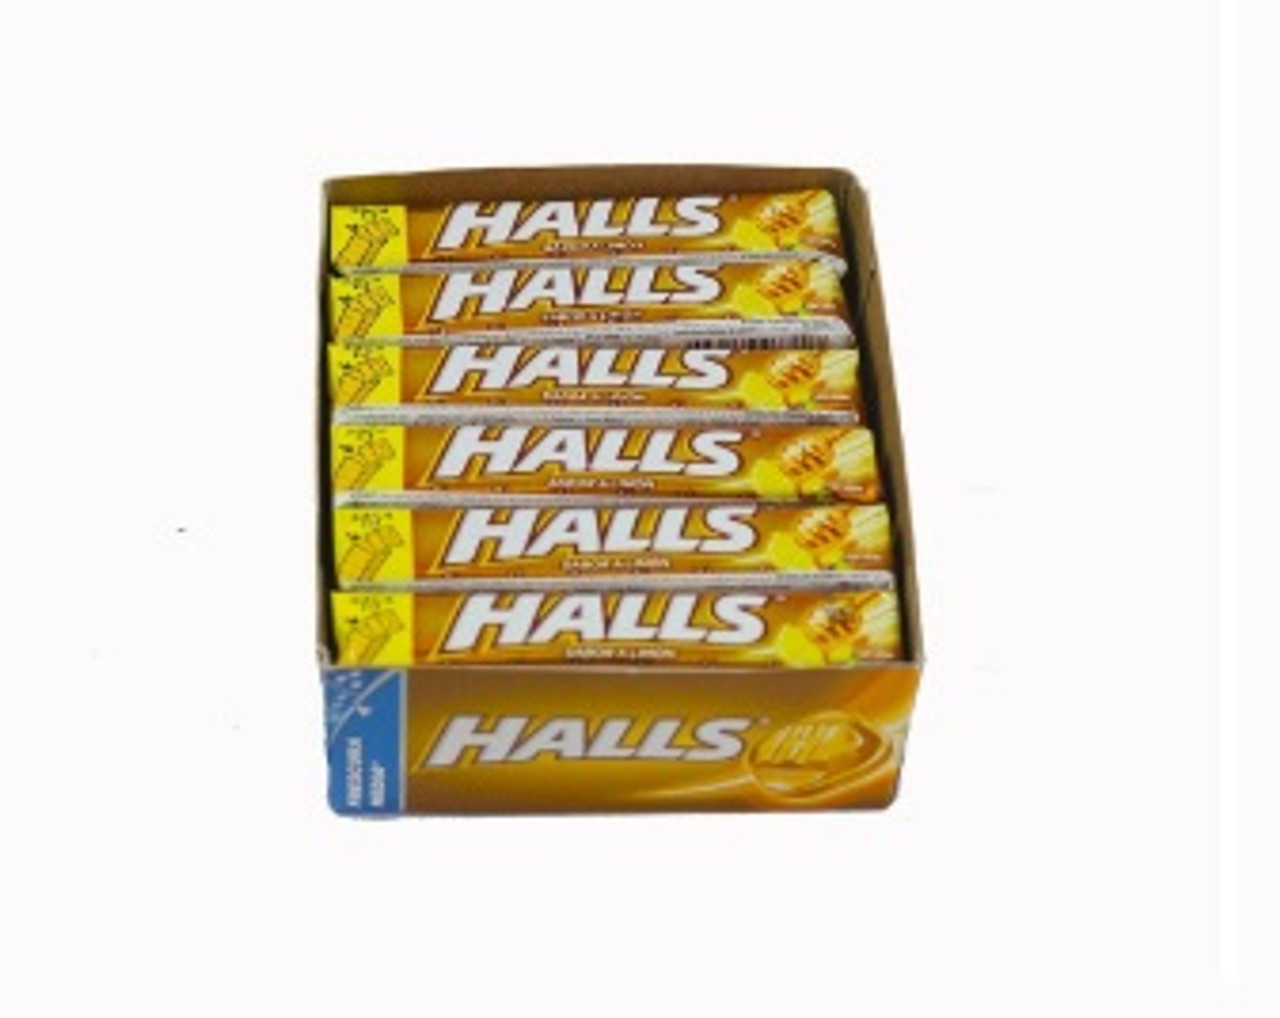 Buy Tobacco Must Have 25 gr Honey Holls online at low price and